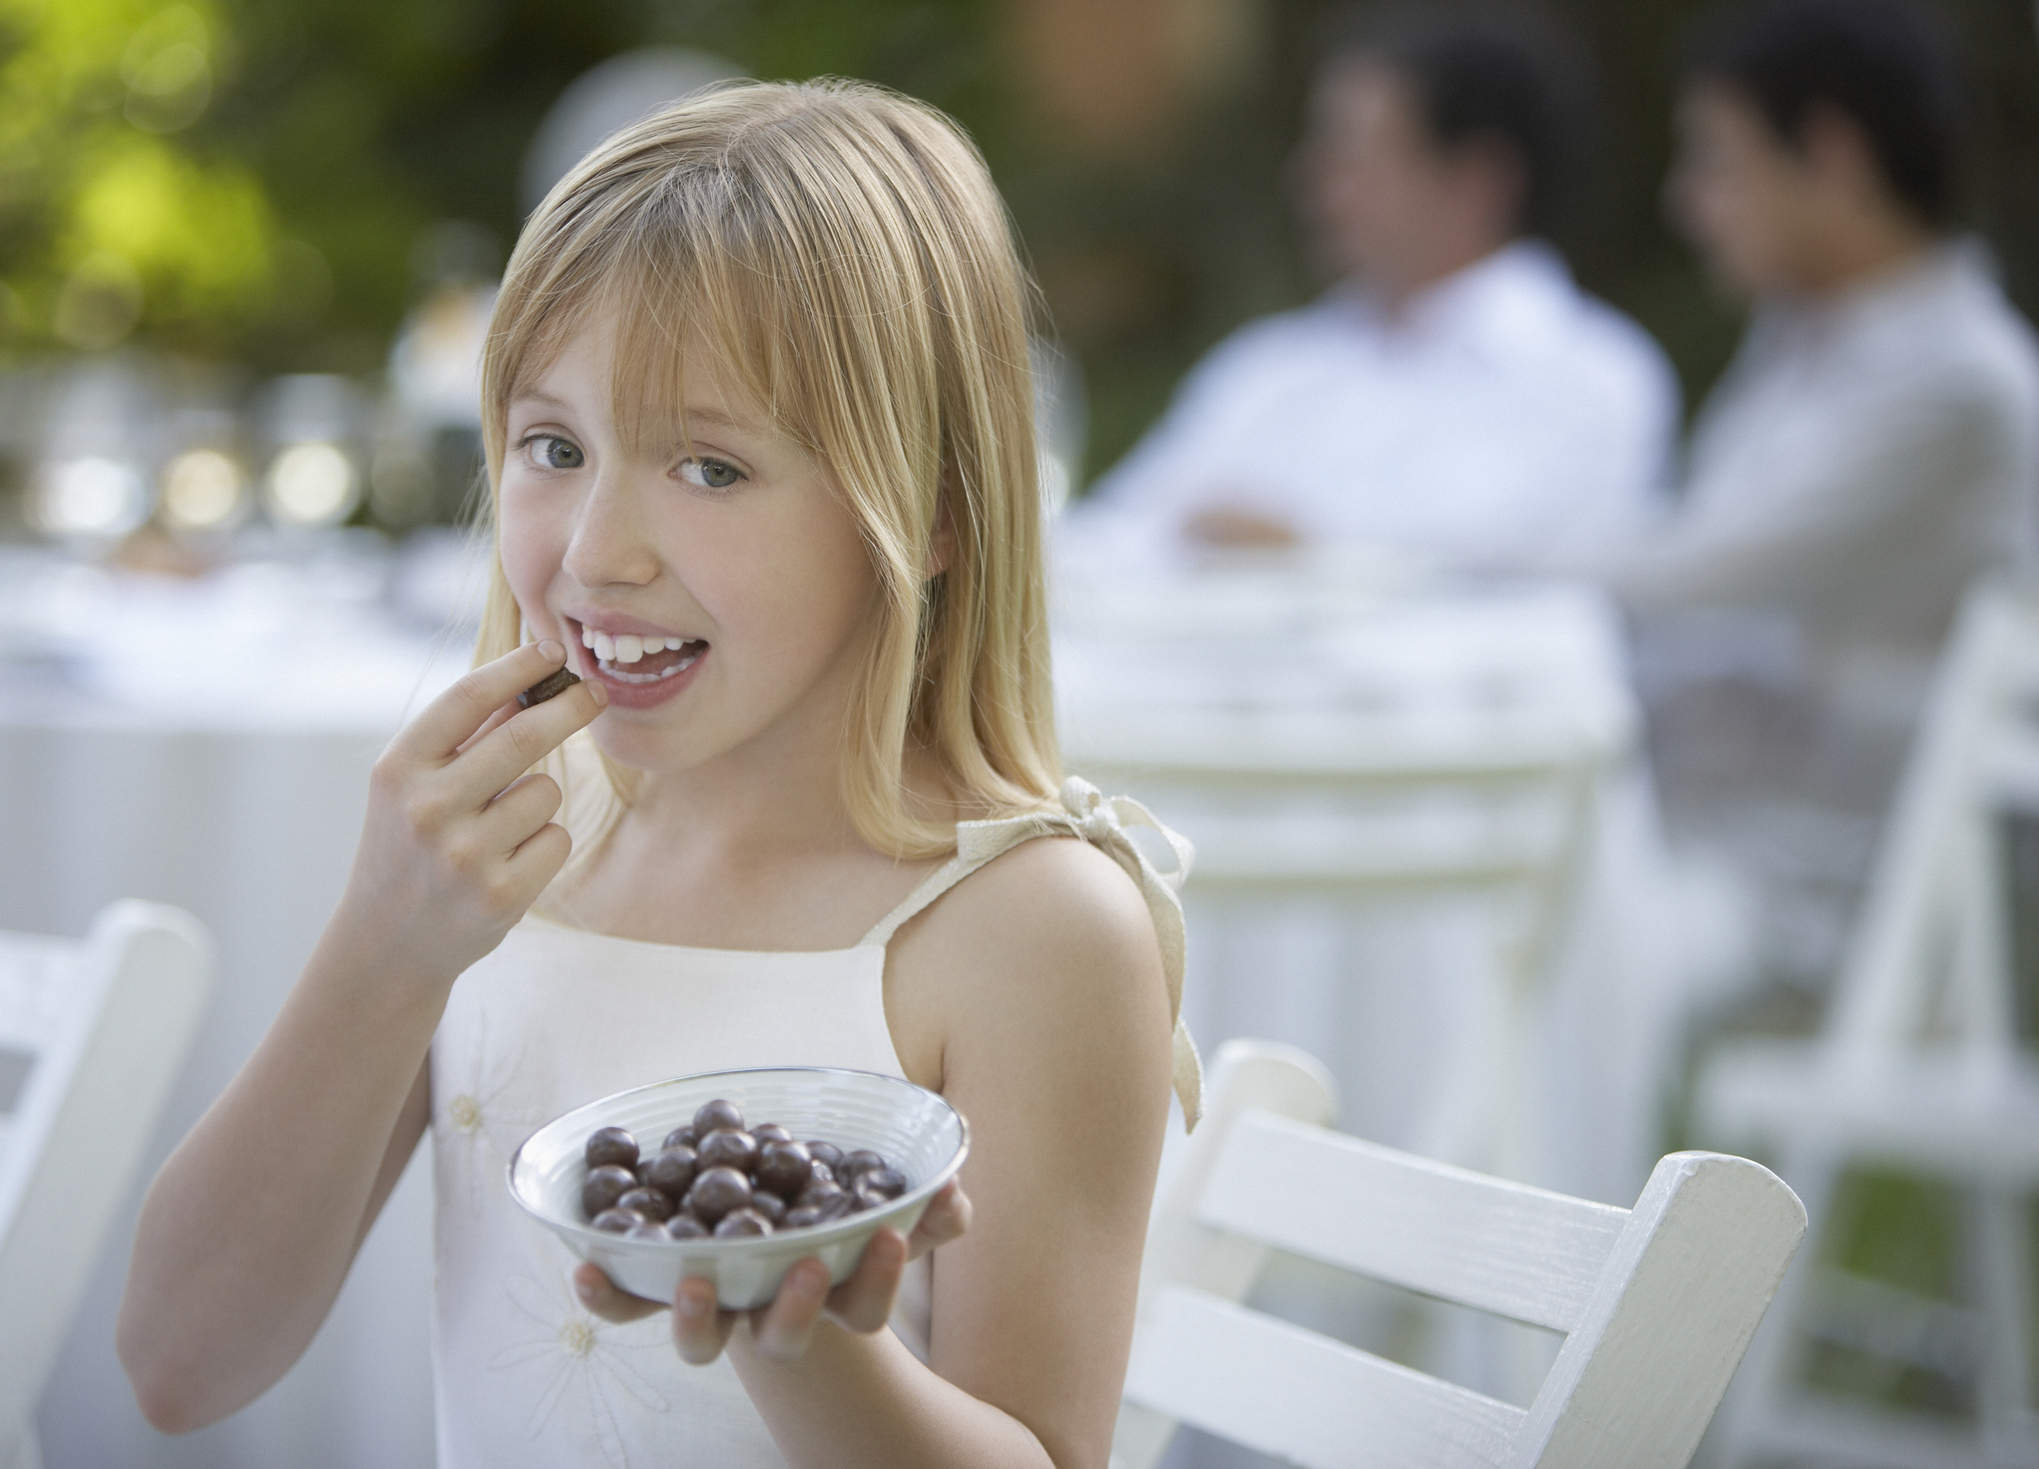 Young girl at outdoor party eating olives